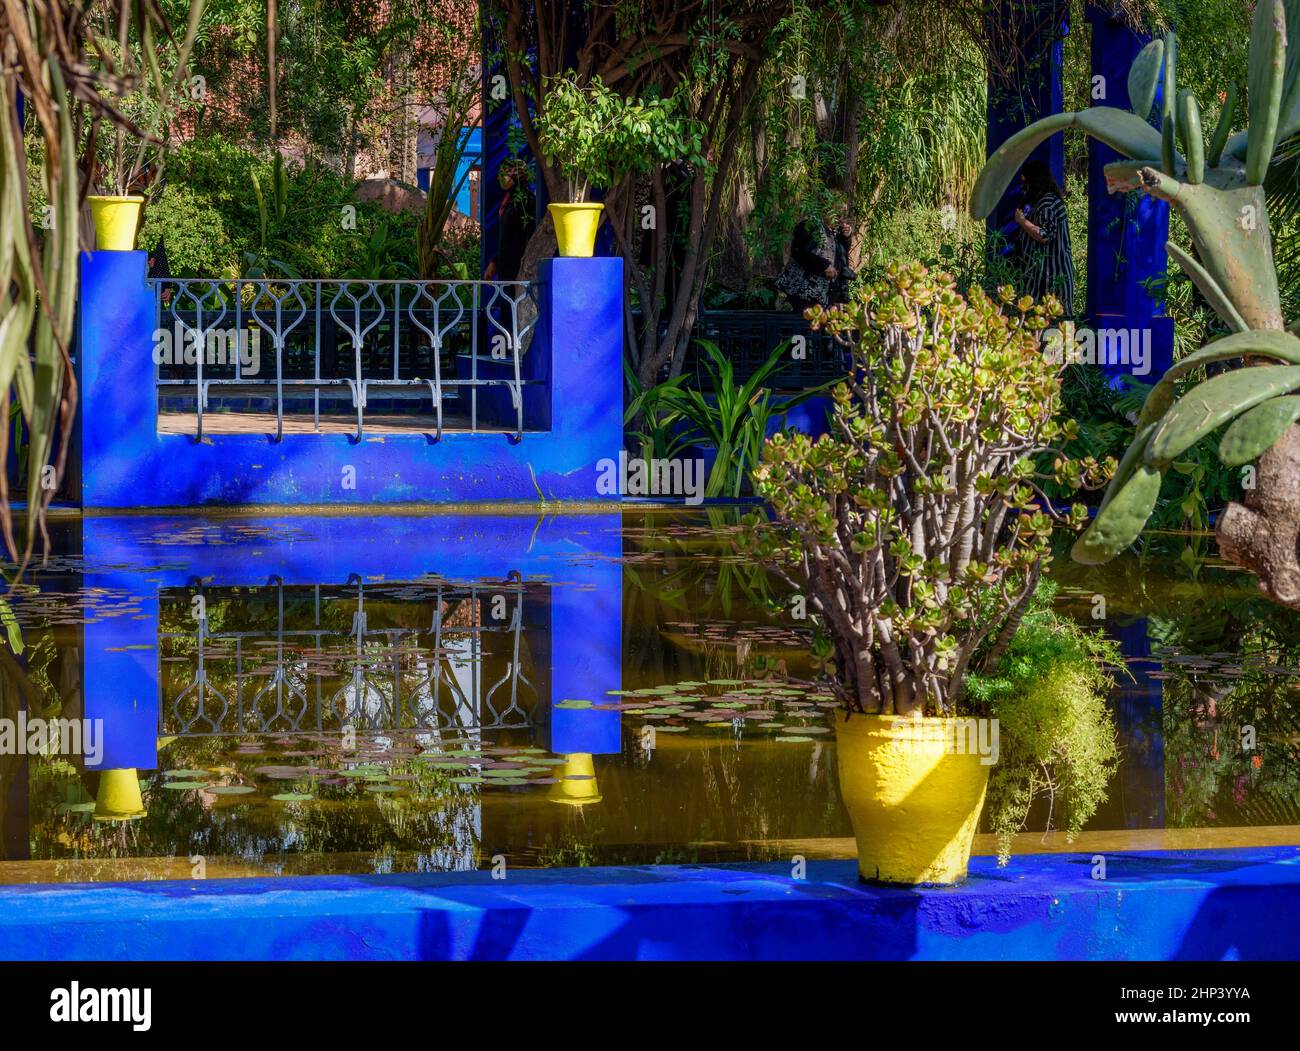 MOROCCO MARRAKESH THE MAJORELLE GARDEN حديقة ماجوريل WITH COBALT BLUE WALLS AND BRIGHT YELLOW POTS Stock Photo